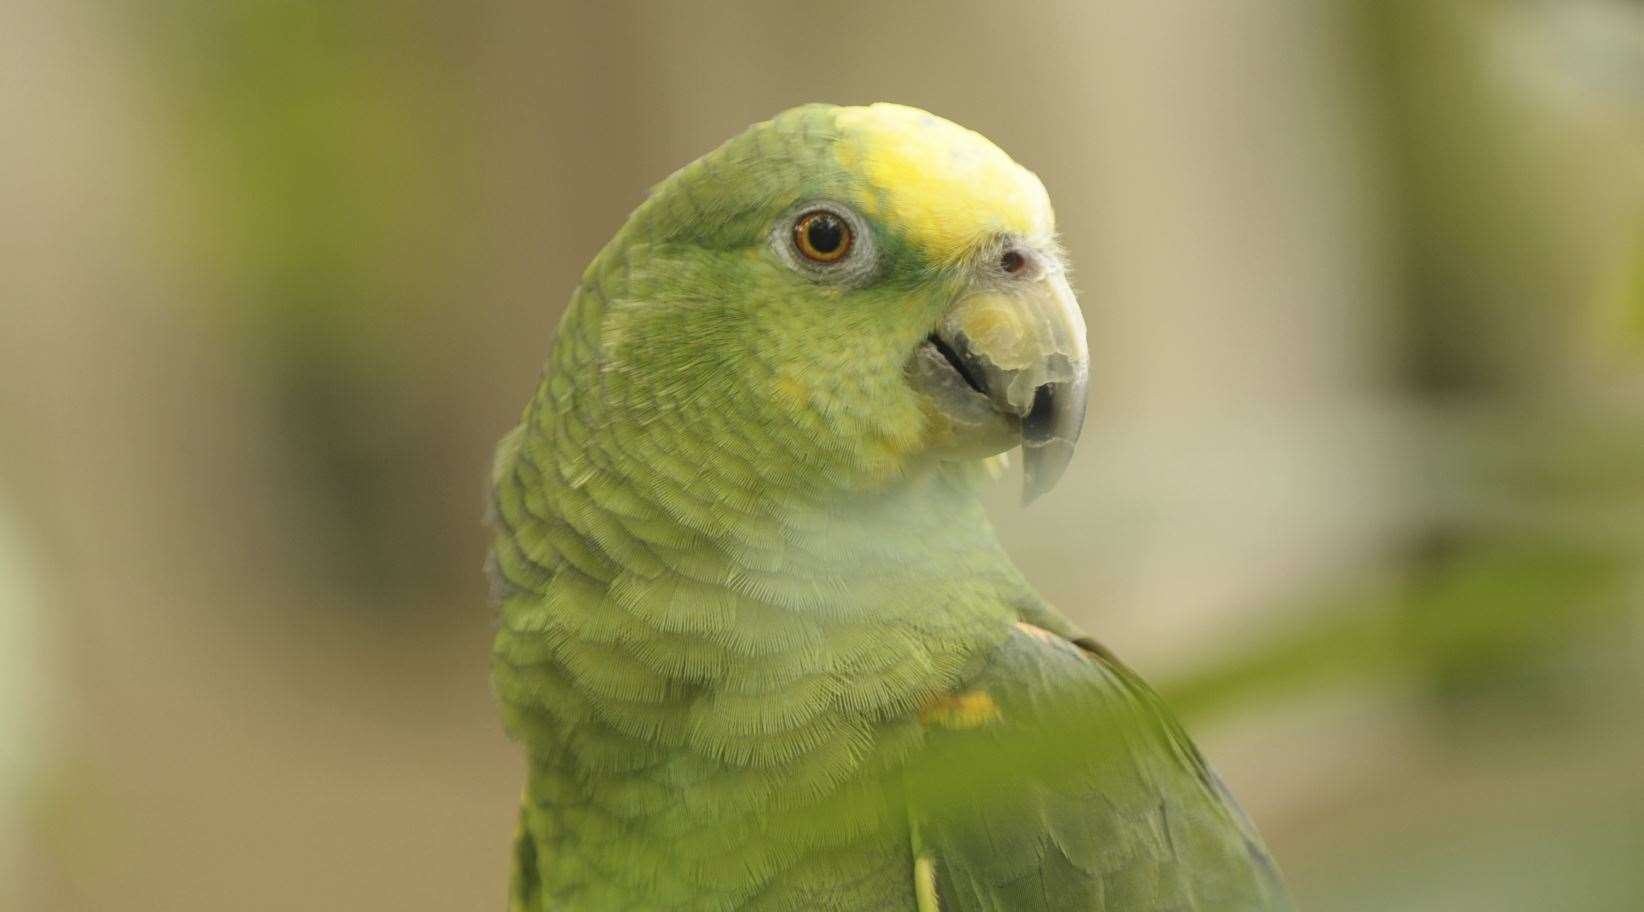 Complaints have also been made about how the parrots are treated at the shop. Stock photo by Getty Images / iStockphoto